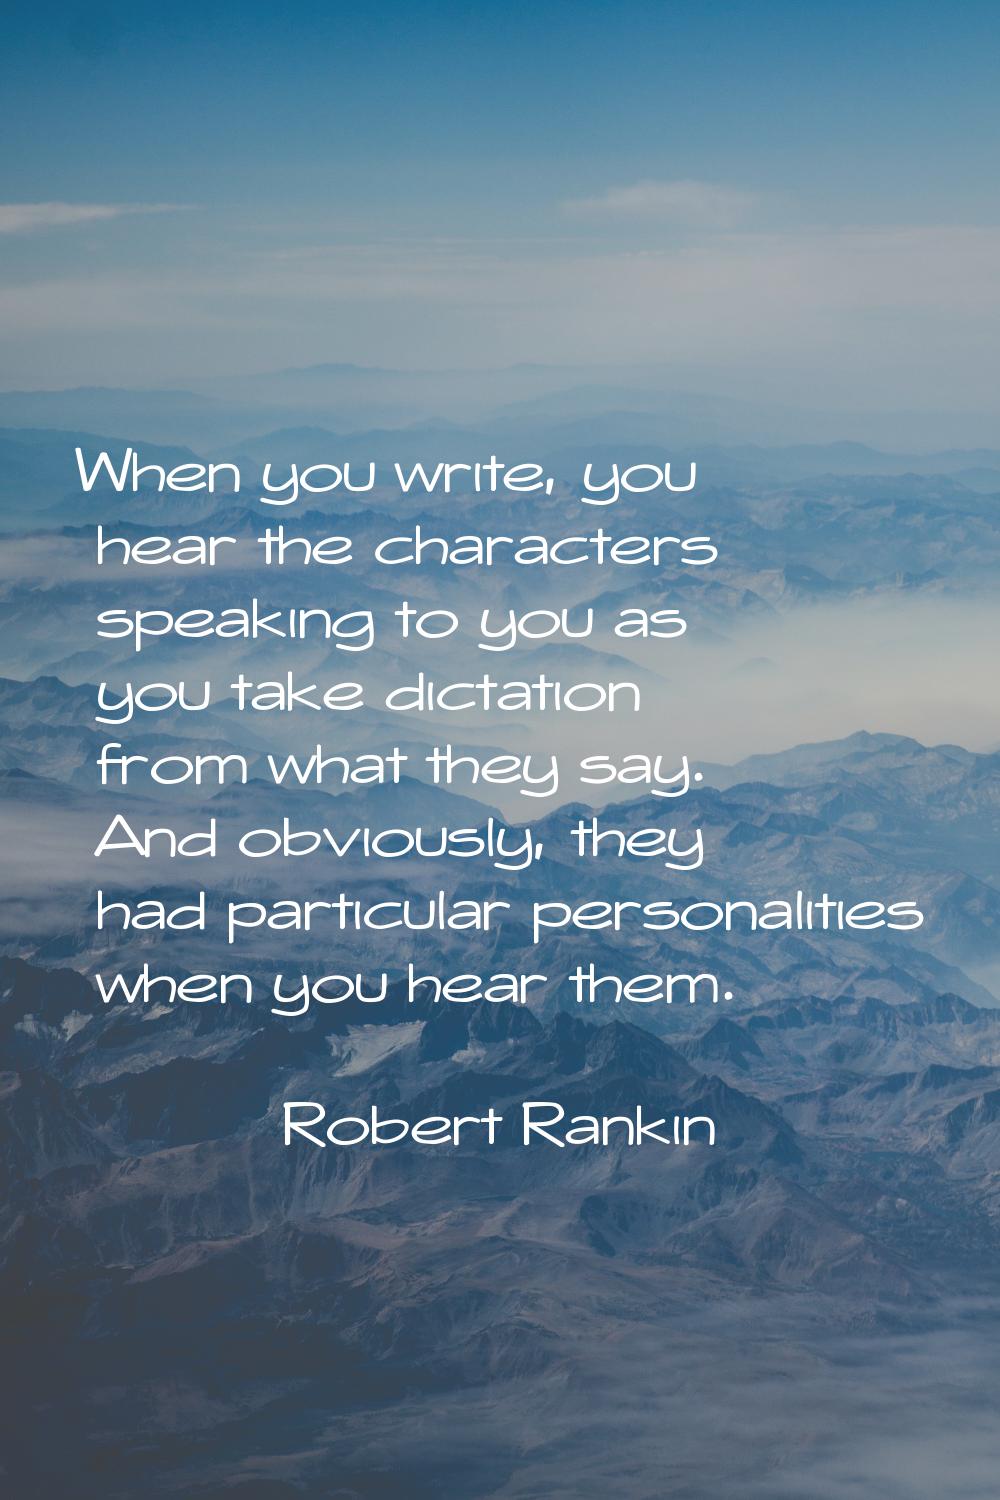 When you write, you hear the characters speaking to you as you take dictation from what they say. A